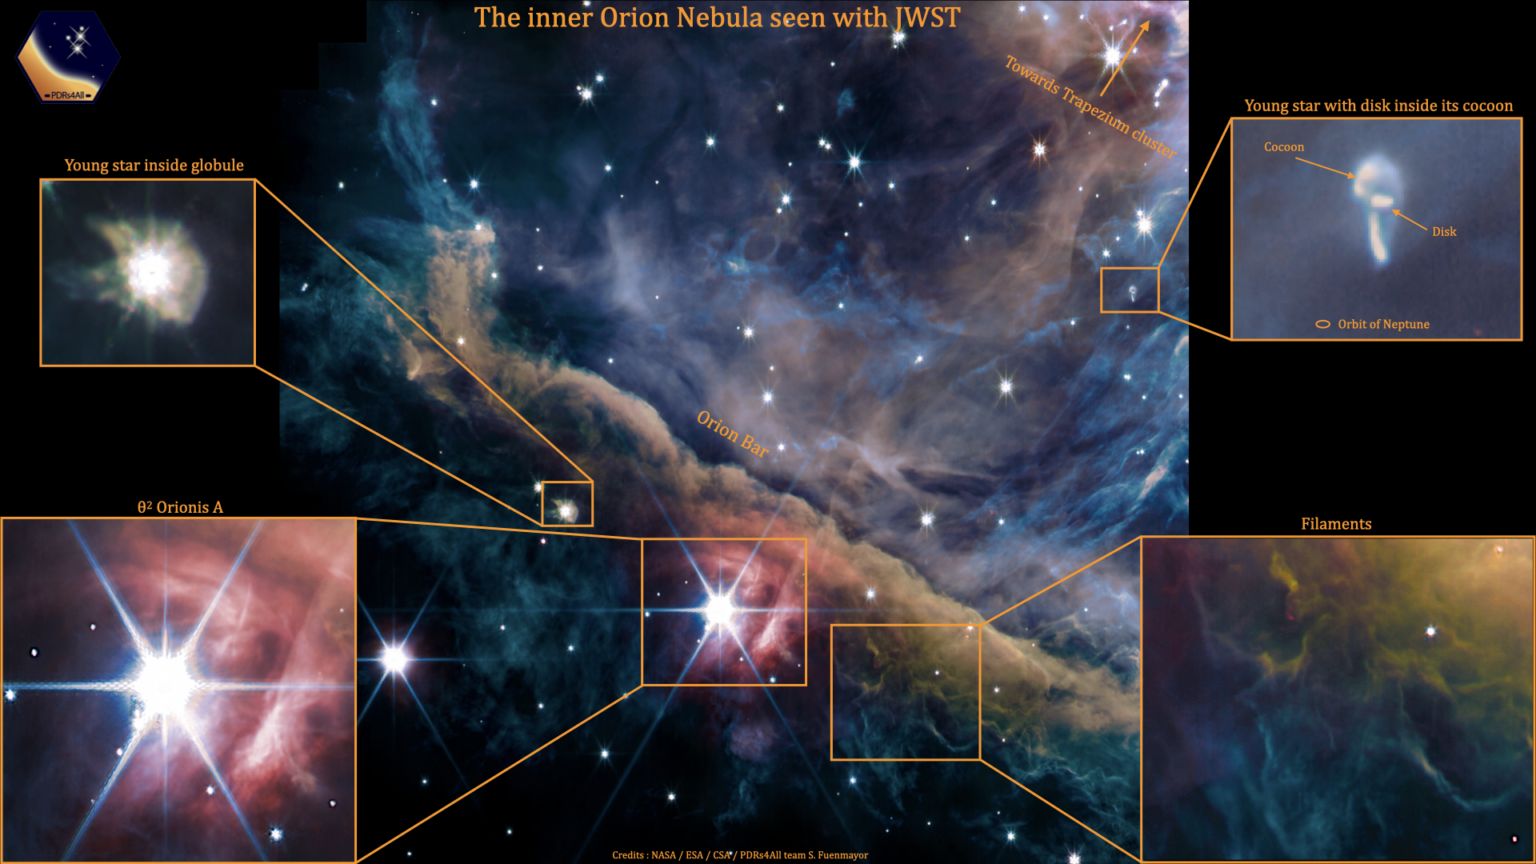 A labeled version of the jwst image of the orion nebula, showing young stars and gas structures